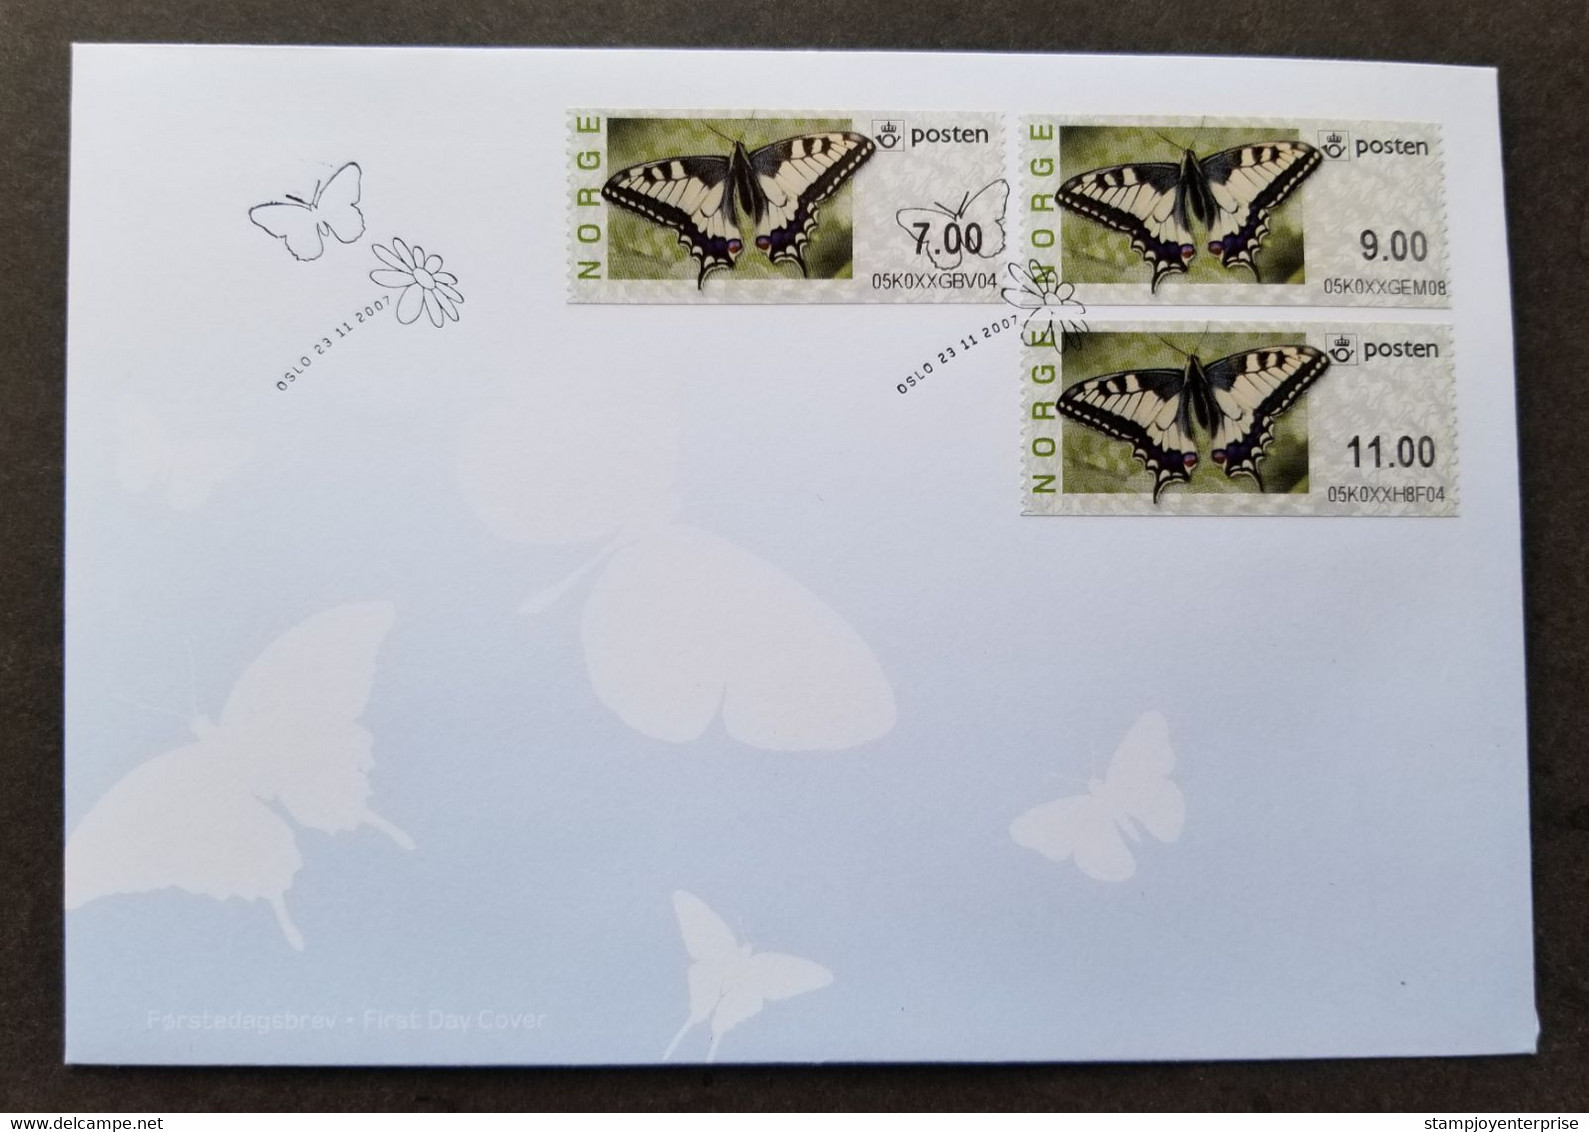 Norway Butterfly 2007 Insect Butterflies (ATM Machine Frama Label Stamp FDC) - Covers & Documents